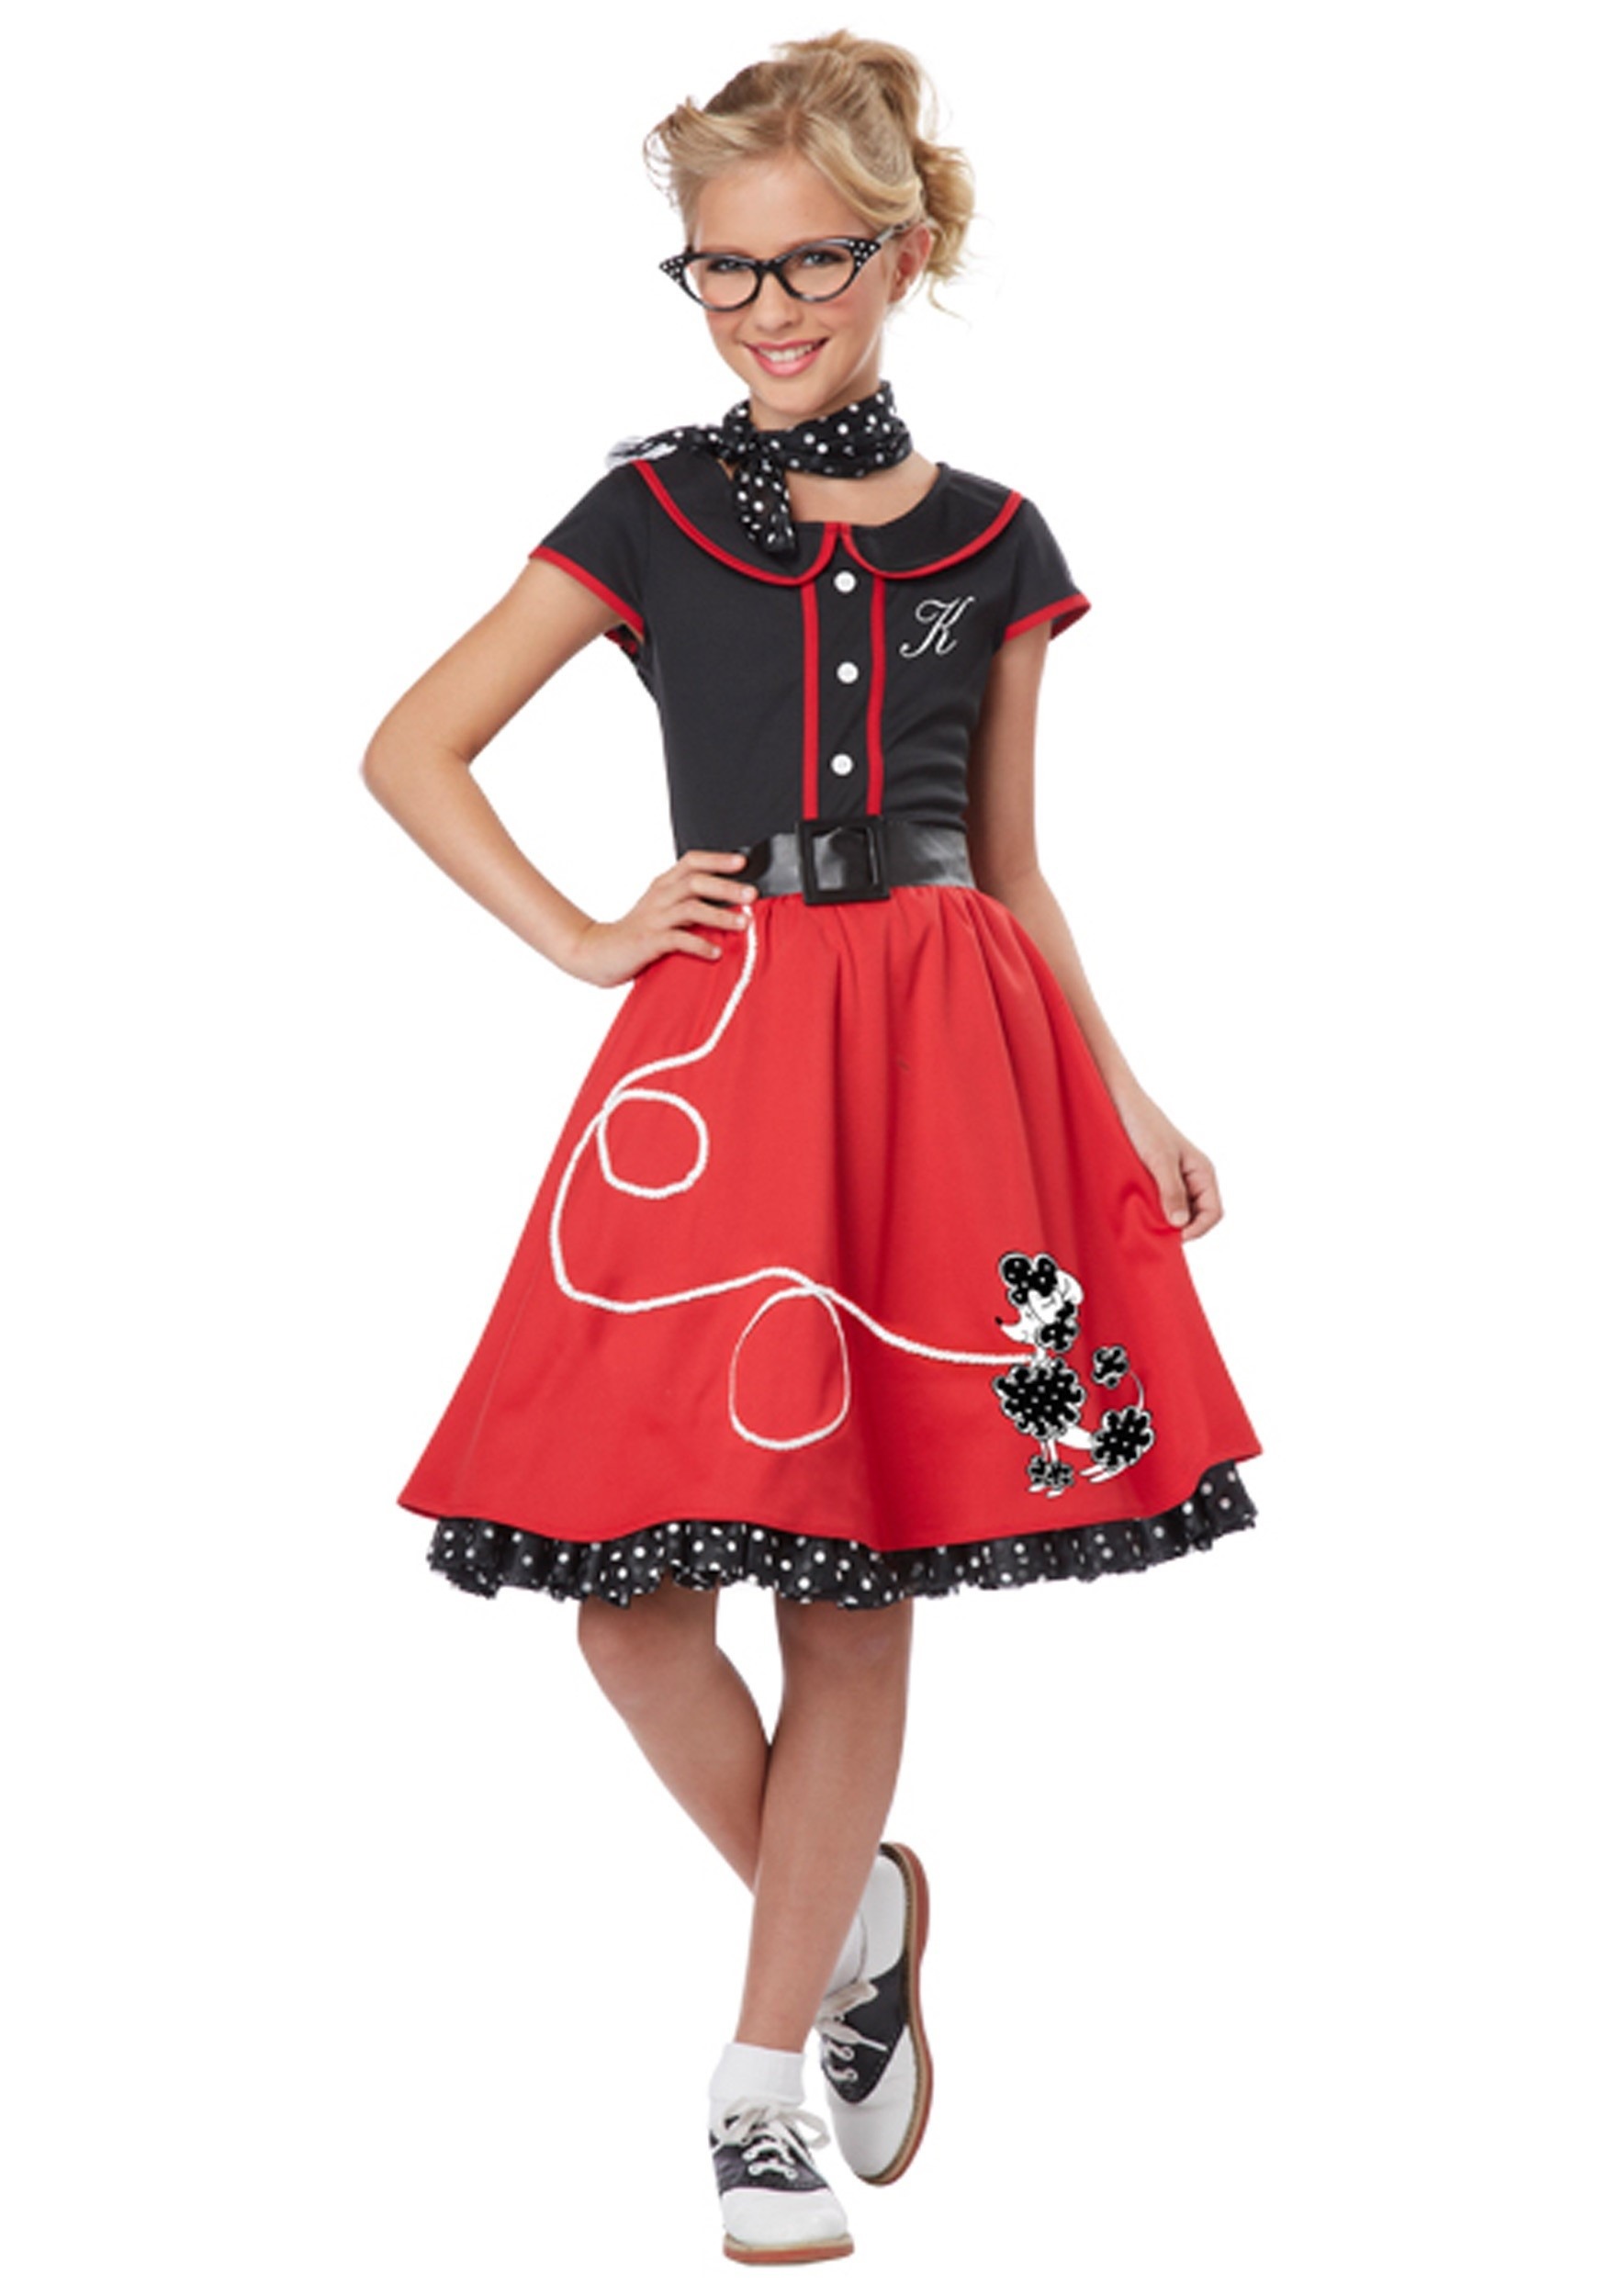 Photos - Fancy Dress California Costume Collection Red 50s Sweetheart Costume for Girls Black&#